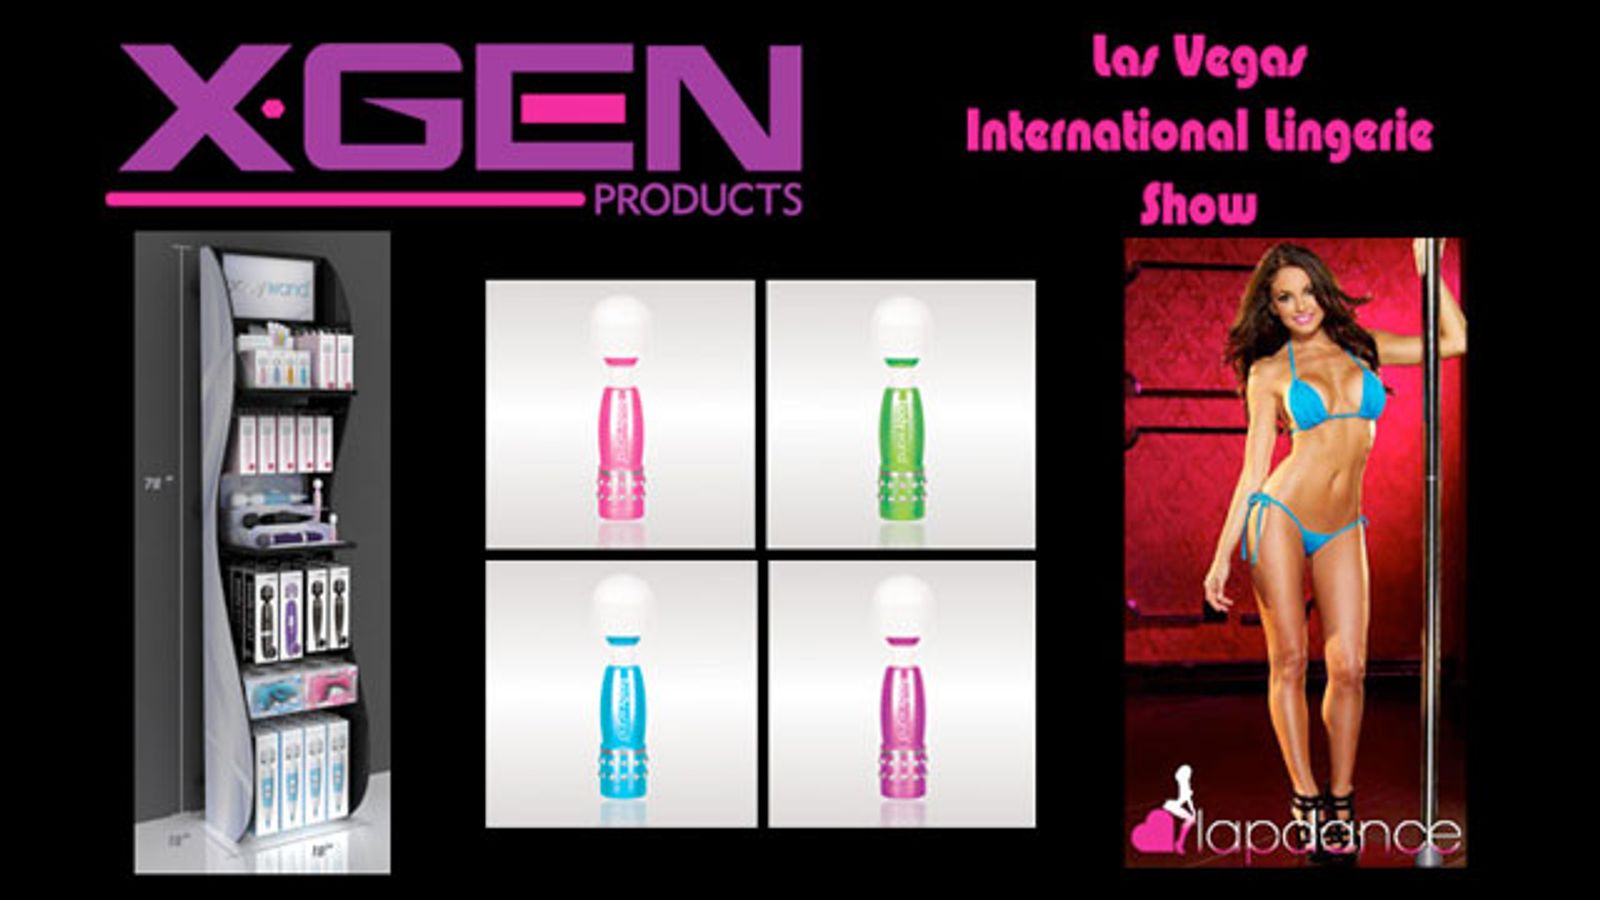 Xgen Products Set to Unveil New Toys, Lingerie at ILS